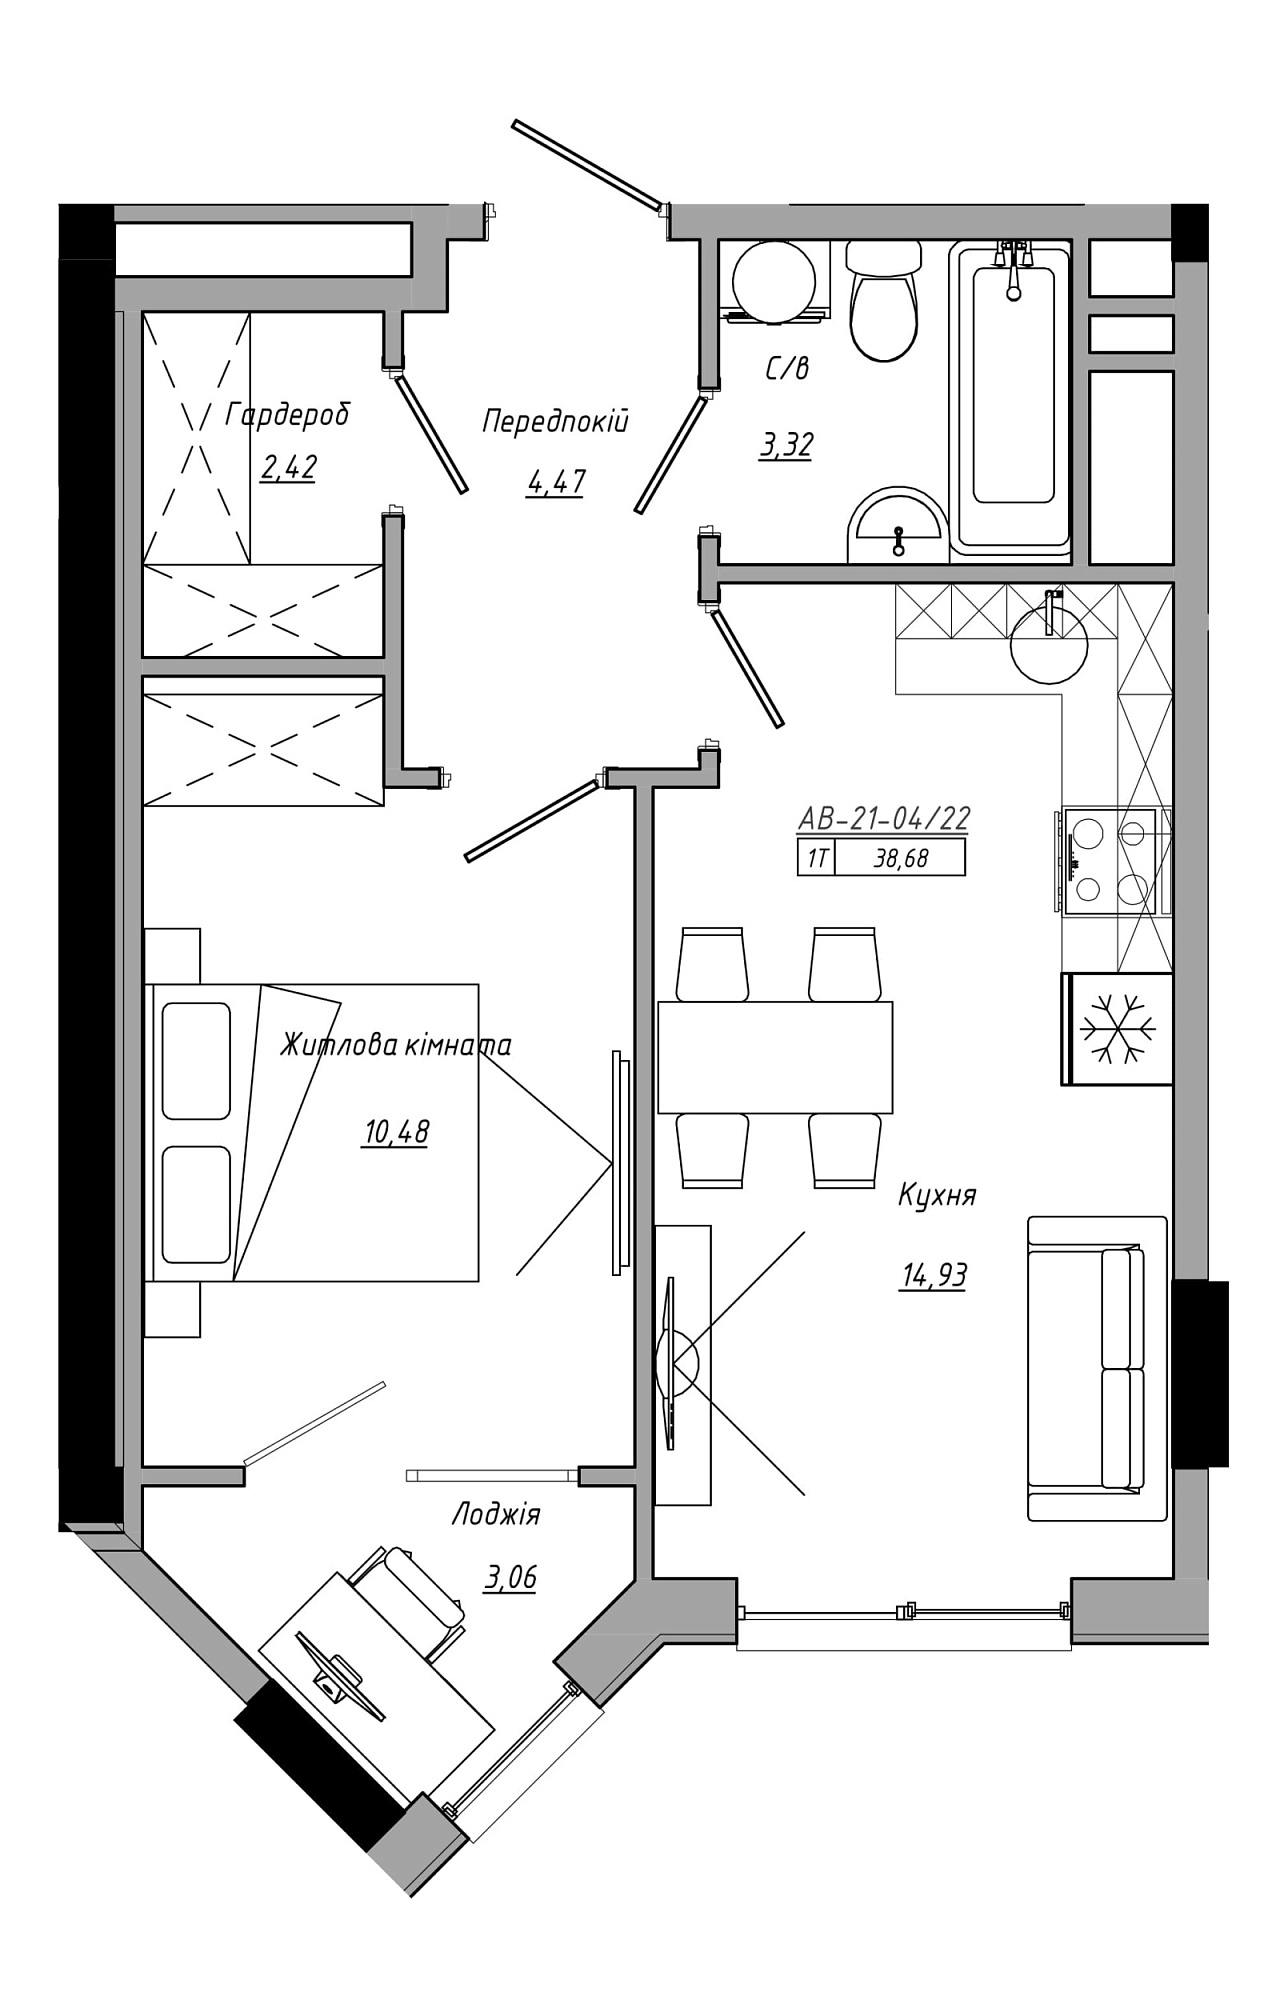 Planning 1-rm flats area 38.68m2, AB-21-04/00022.